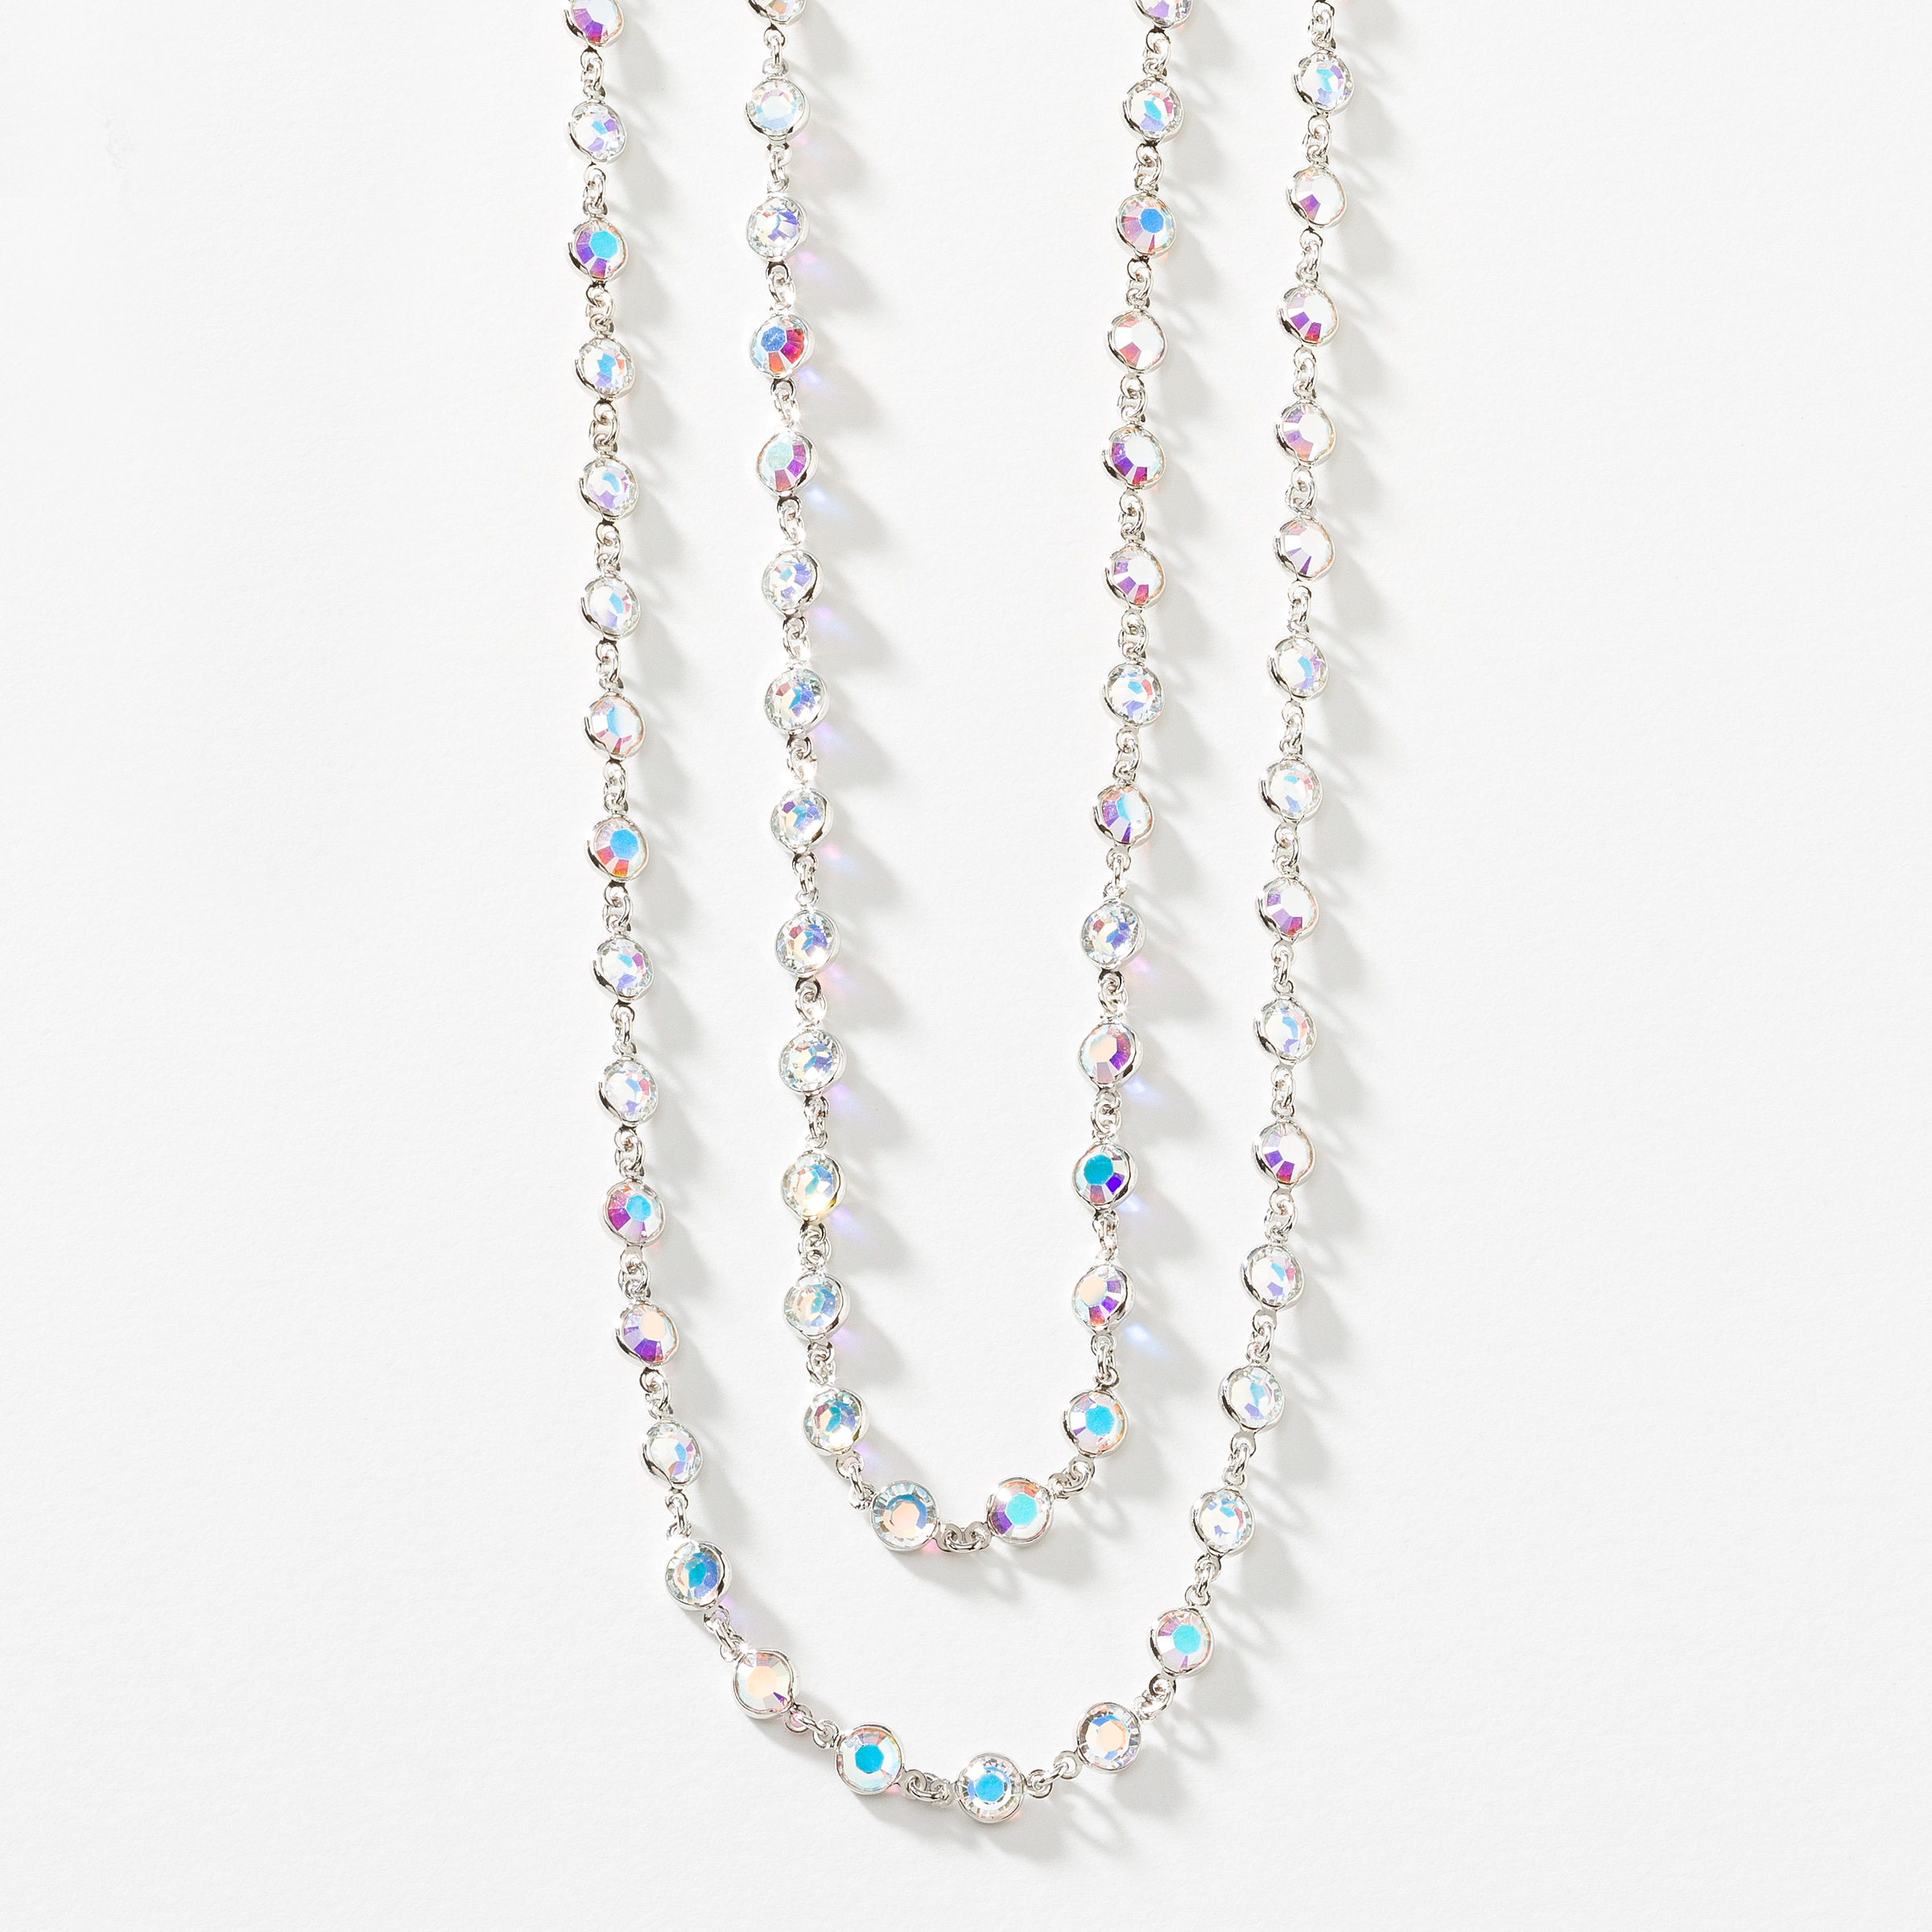 Mini Chanelle Extra Long Necklace, Crystal Aurore Boreale